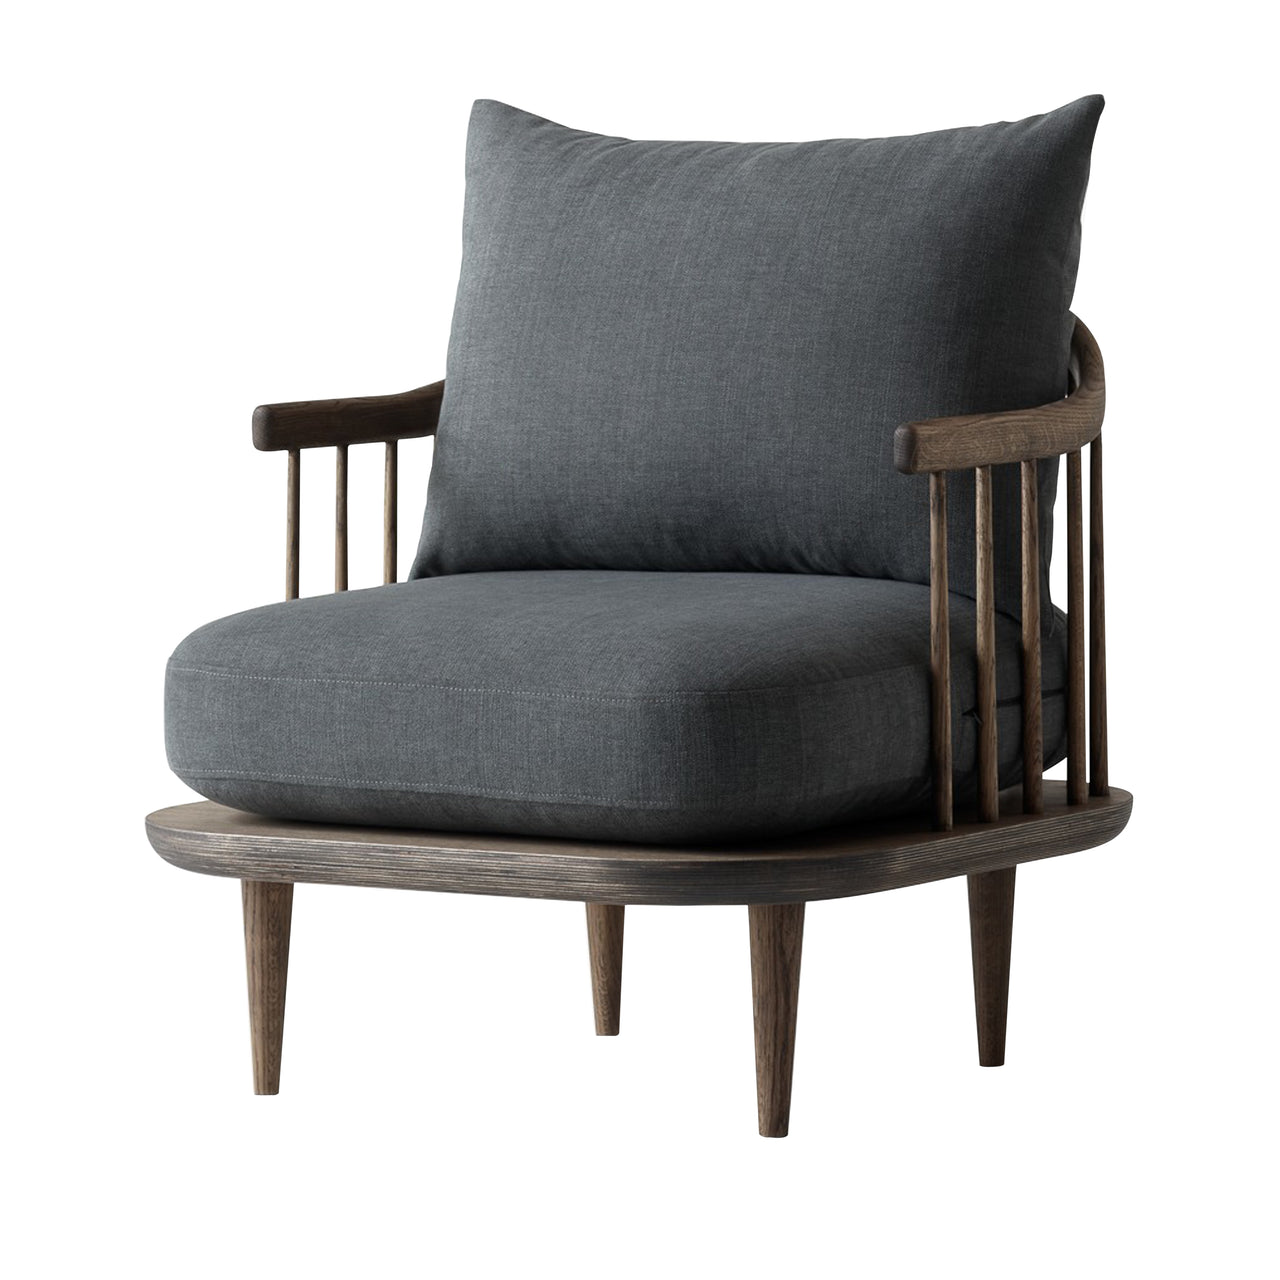 Fly Series SC10 Lounge Chair: Smoked Oiled Oak + Hot Madison 093